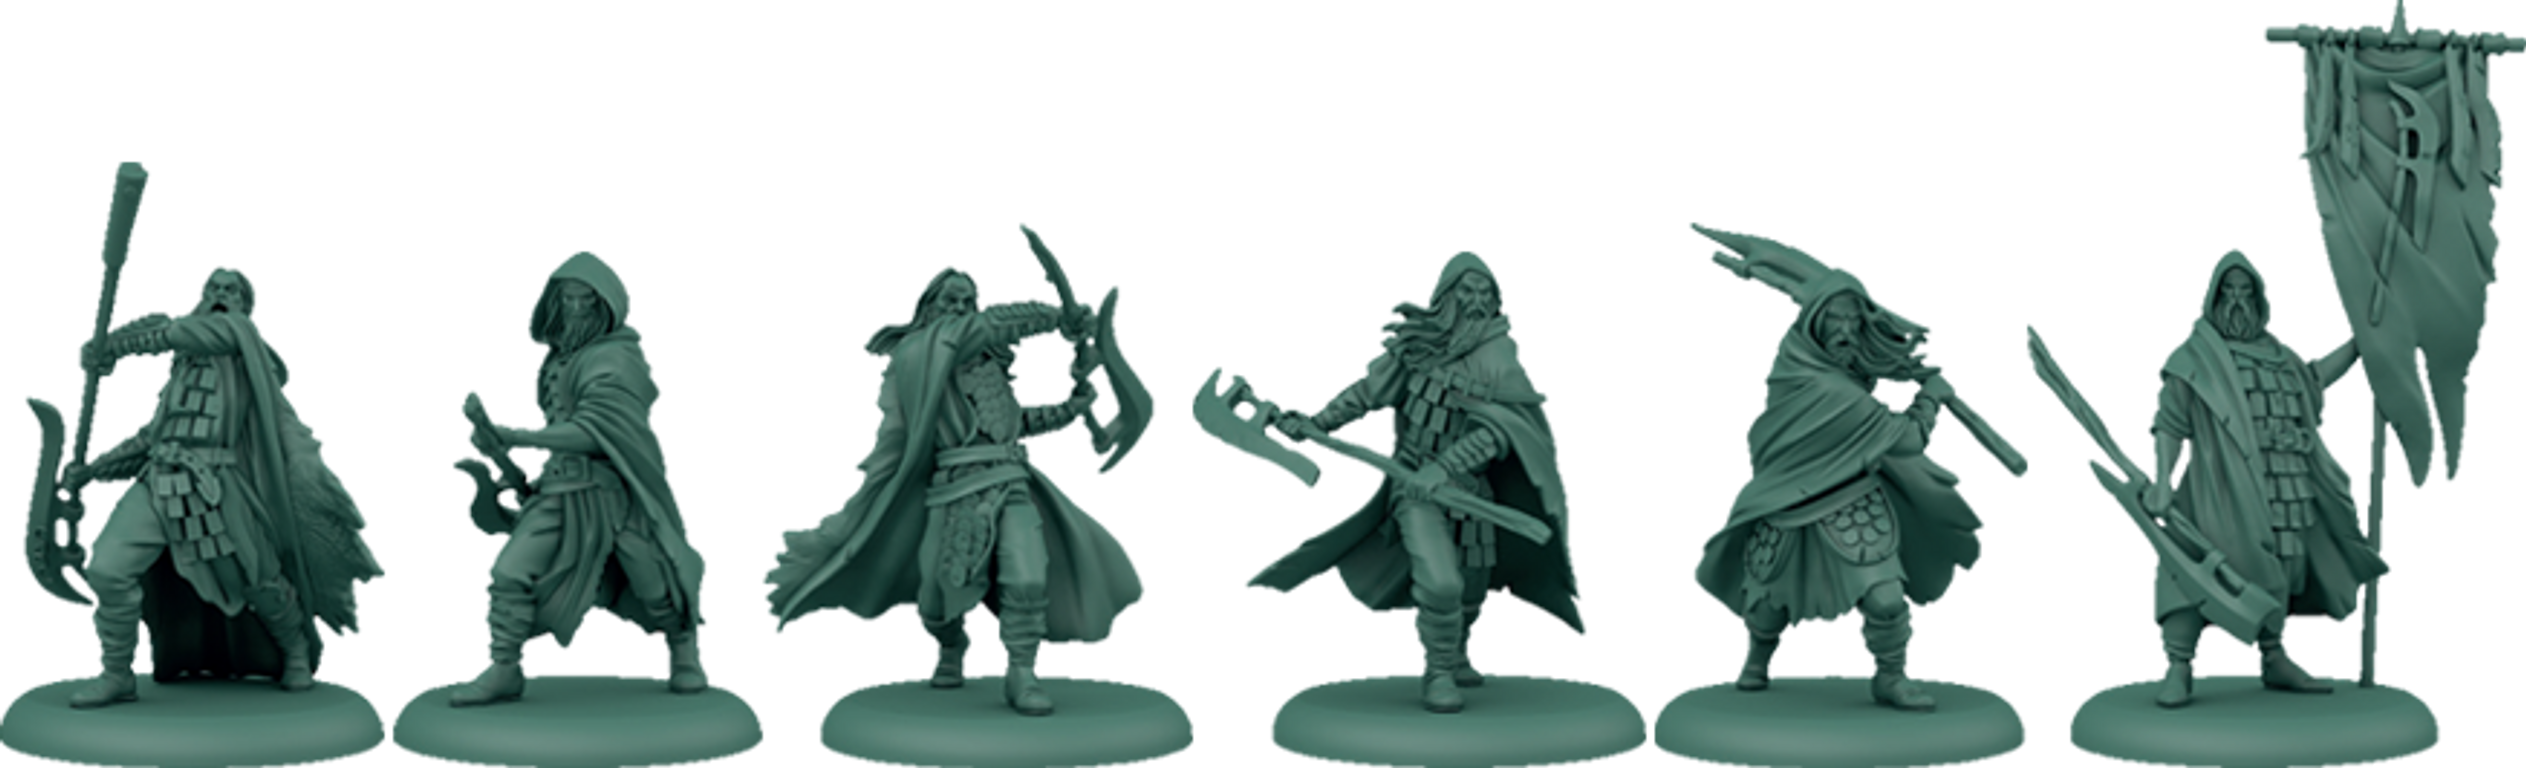 A Song of Ice & Fire – Harlaw Reapers miniatures